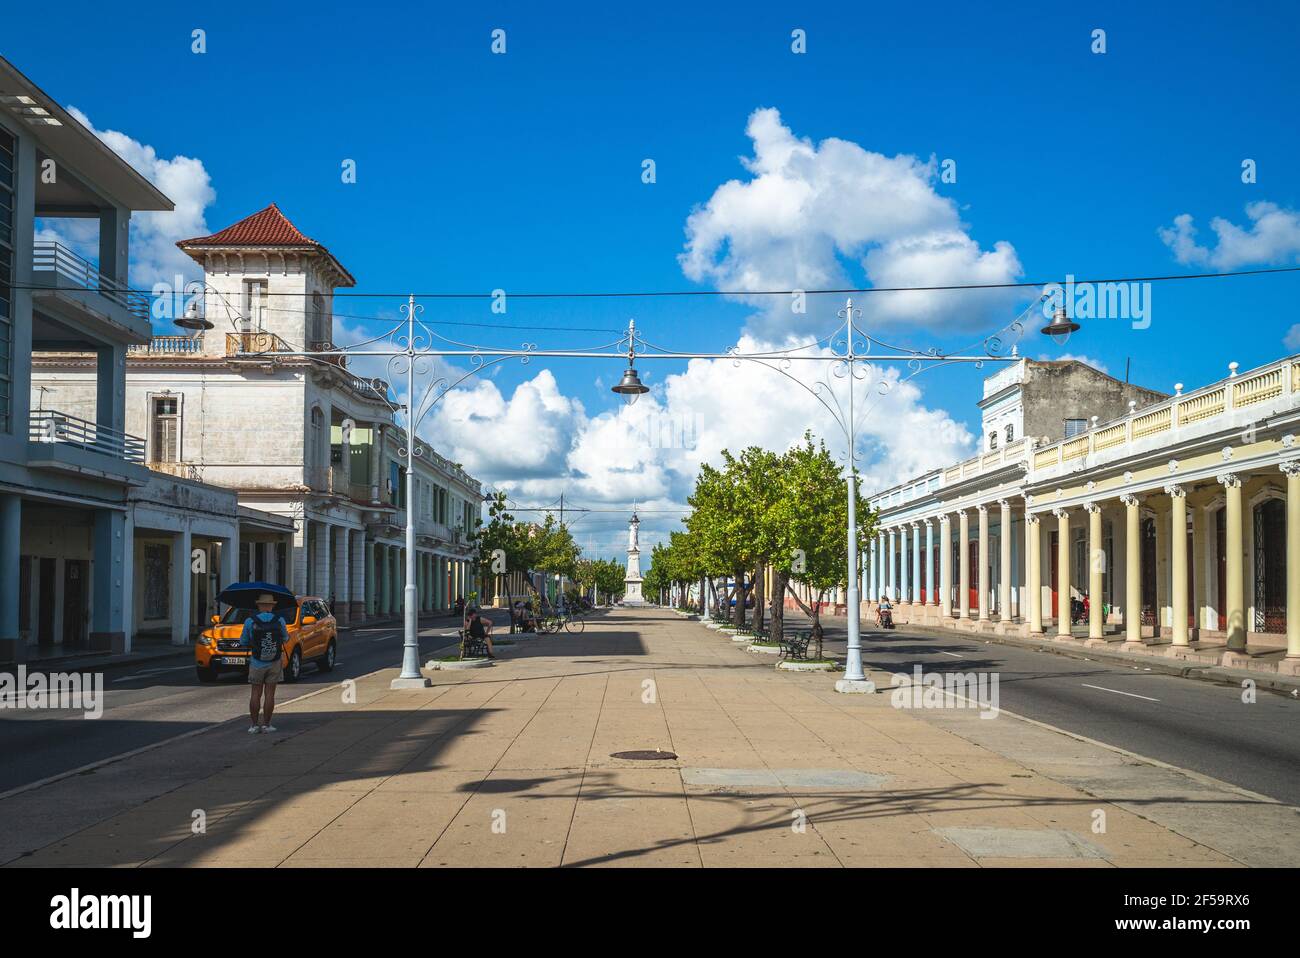 October 30, 2019: Street scene of Paseo del Prado, the main street of Cienfuegos and the longest street in Cuba with about 2 kilometers of length. It Stock Photo